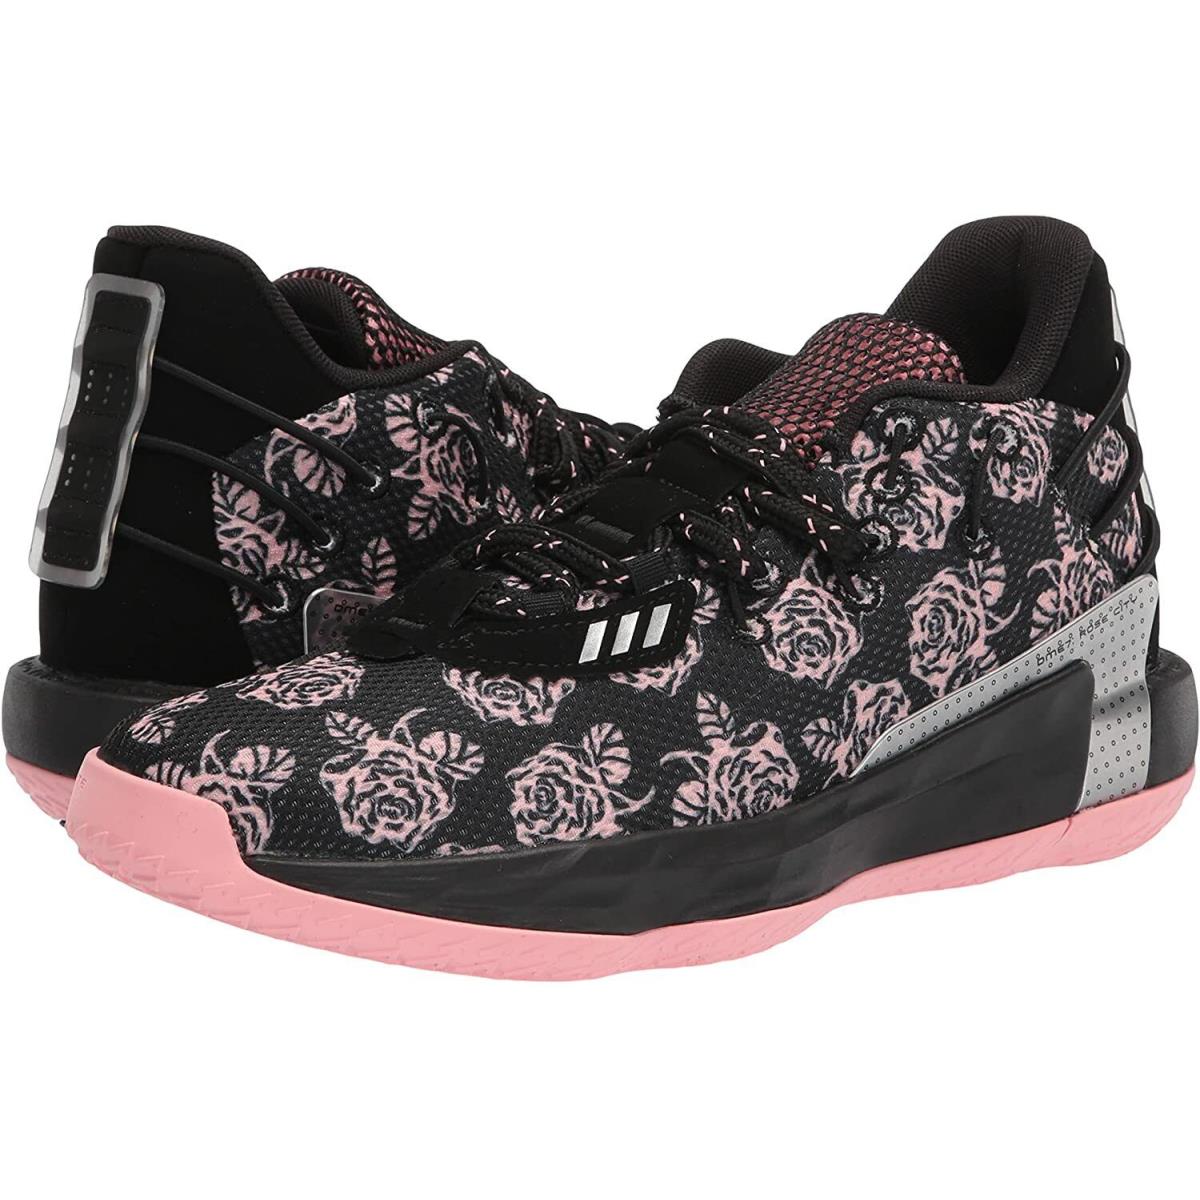 Adidas Girl`s `dame 7` Black/pink/silver Floral Print Basketball Shoes - 6